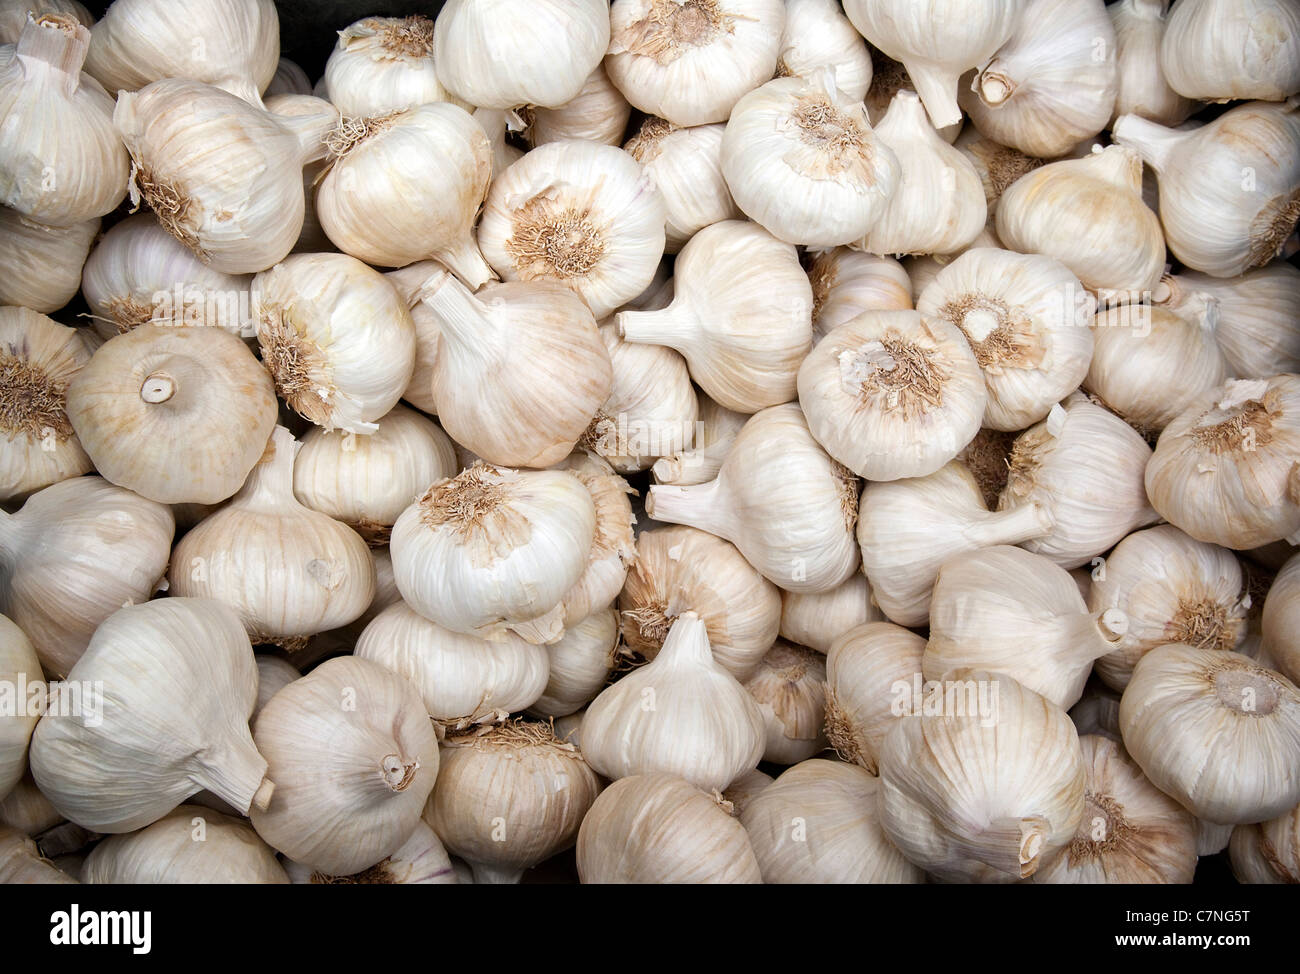 A selection of garlic bulbs on a market stall in southern Spain. Stock Photo